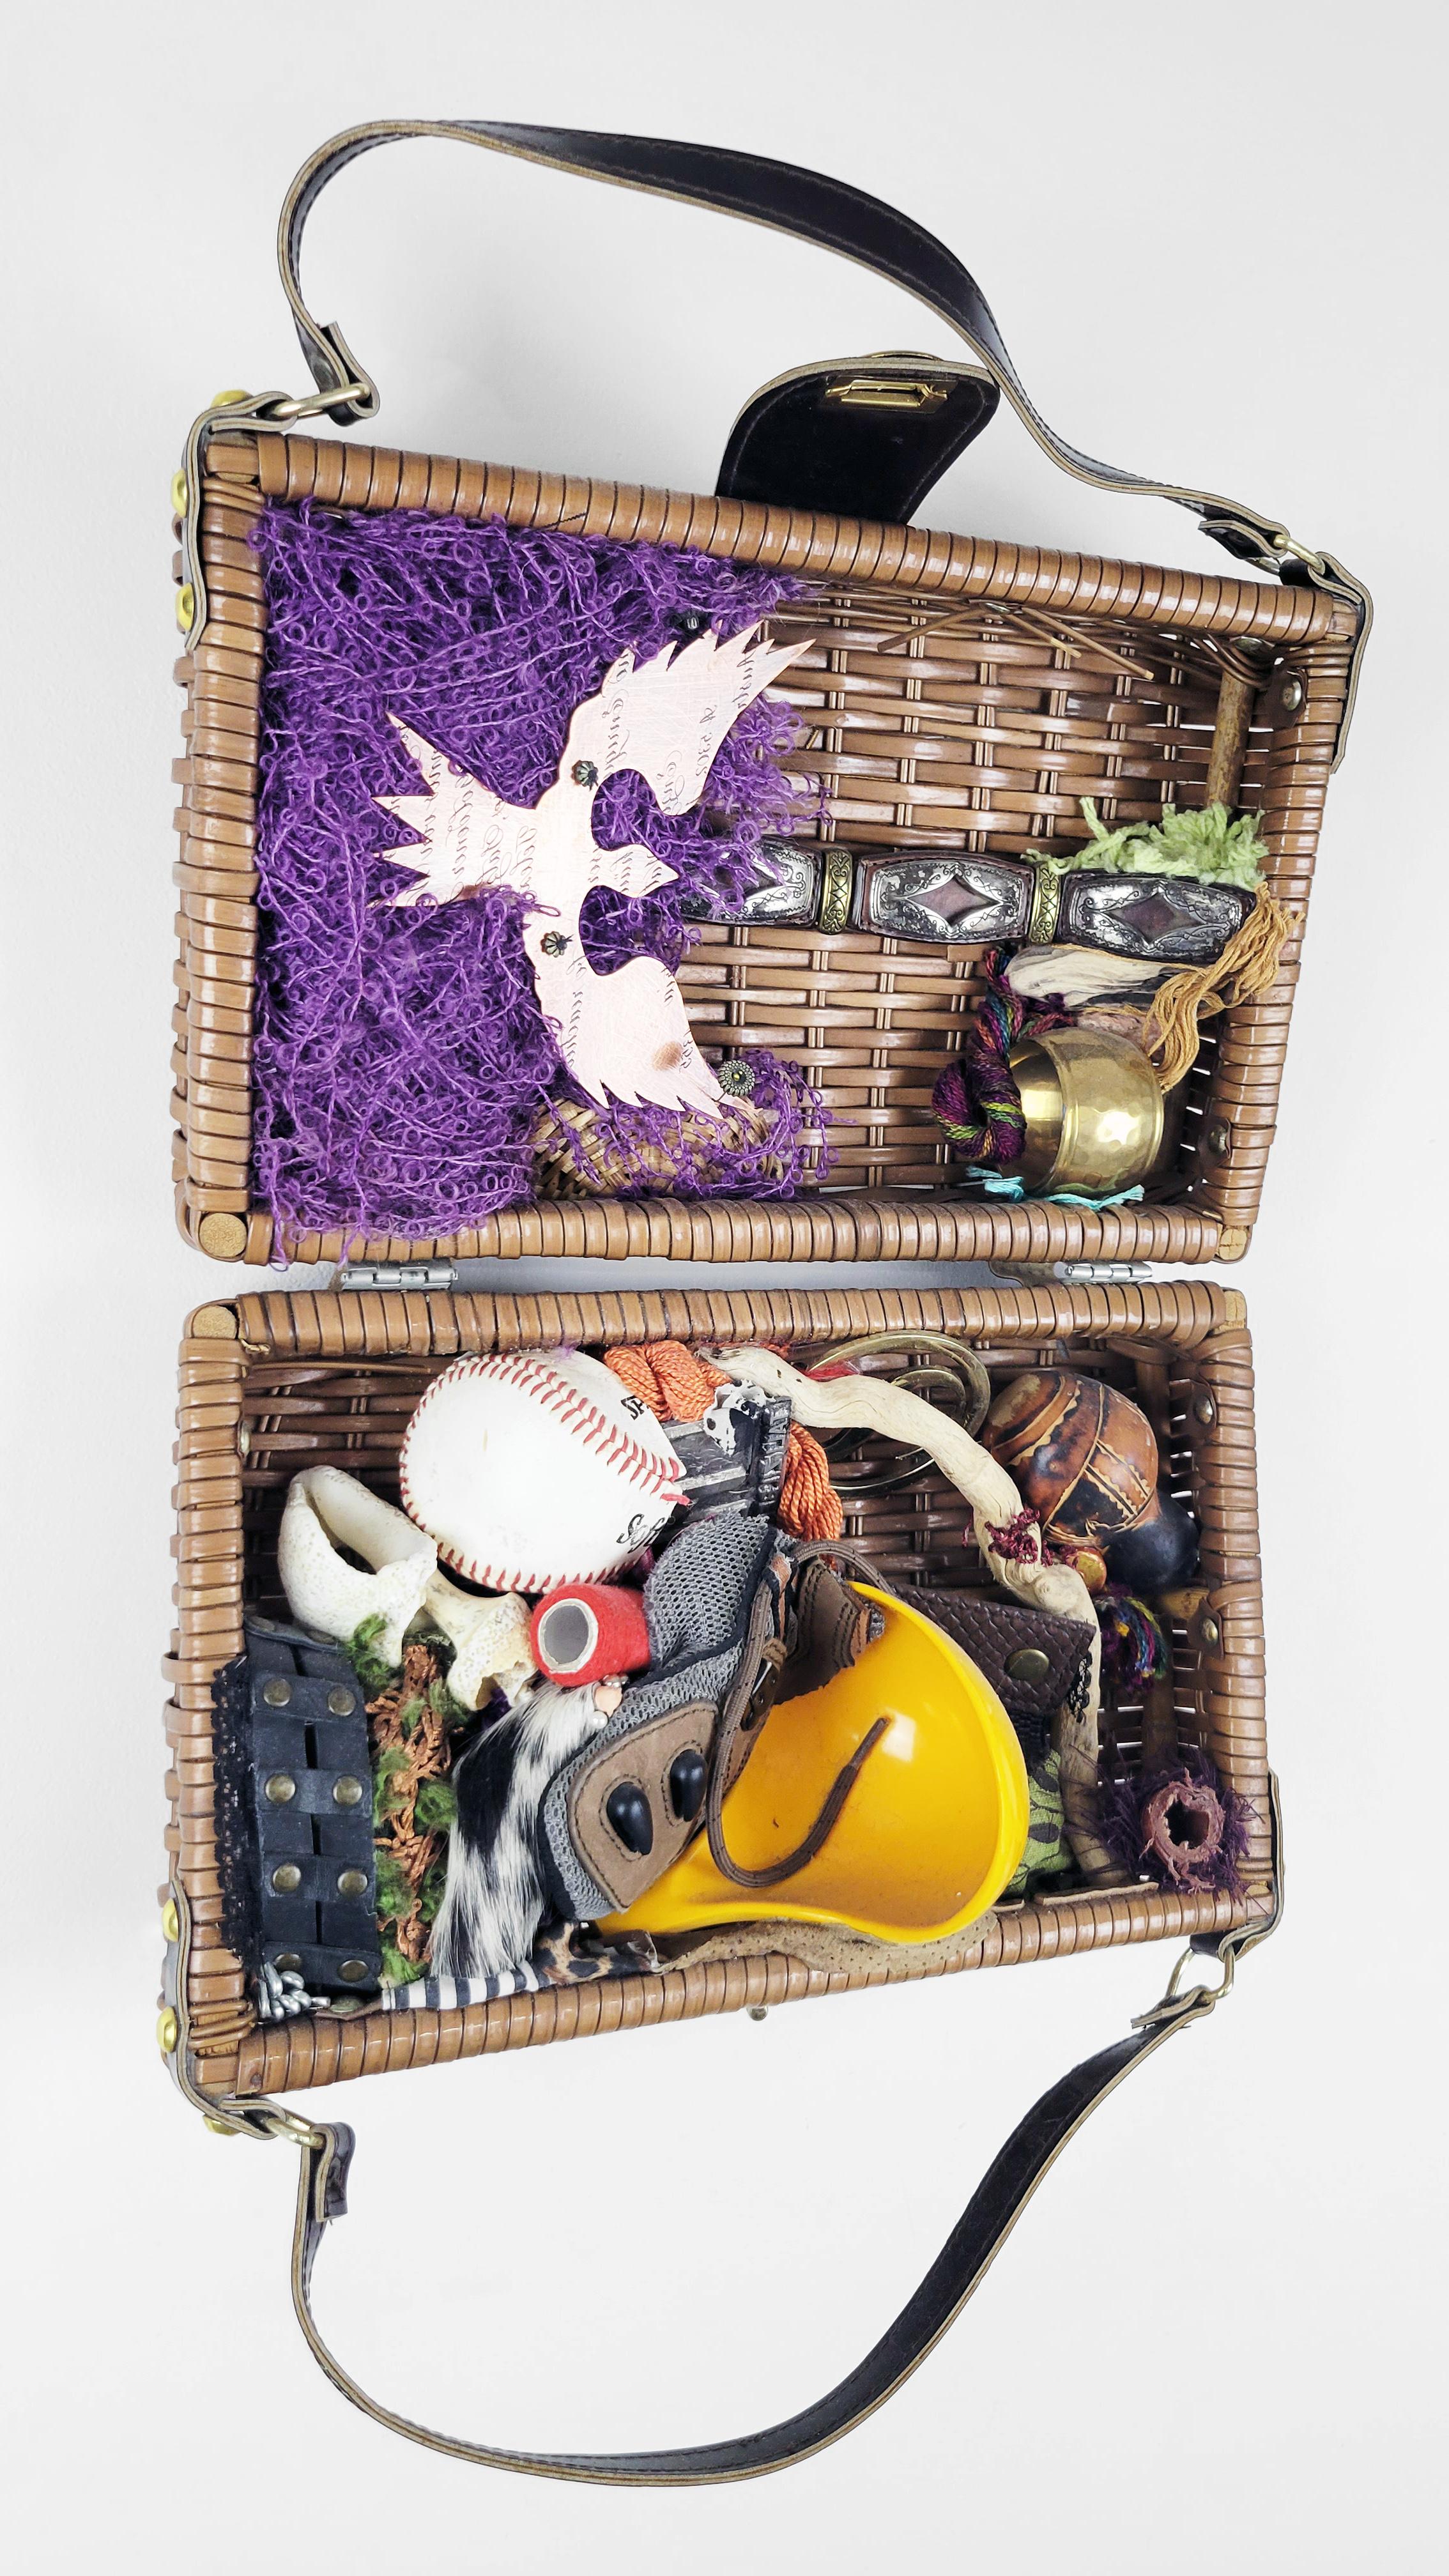 Linda Stein, Picnic Case 928 - Contemporary Mixed Media Wunderkammer Sculpture

This work from Linda Stein's Displacement From Home series draws from the tradition of wunderkammer/cabinets of curiosities to highlight the global displacement and